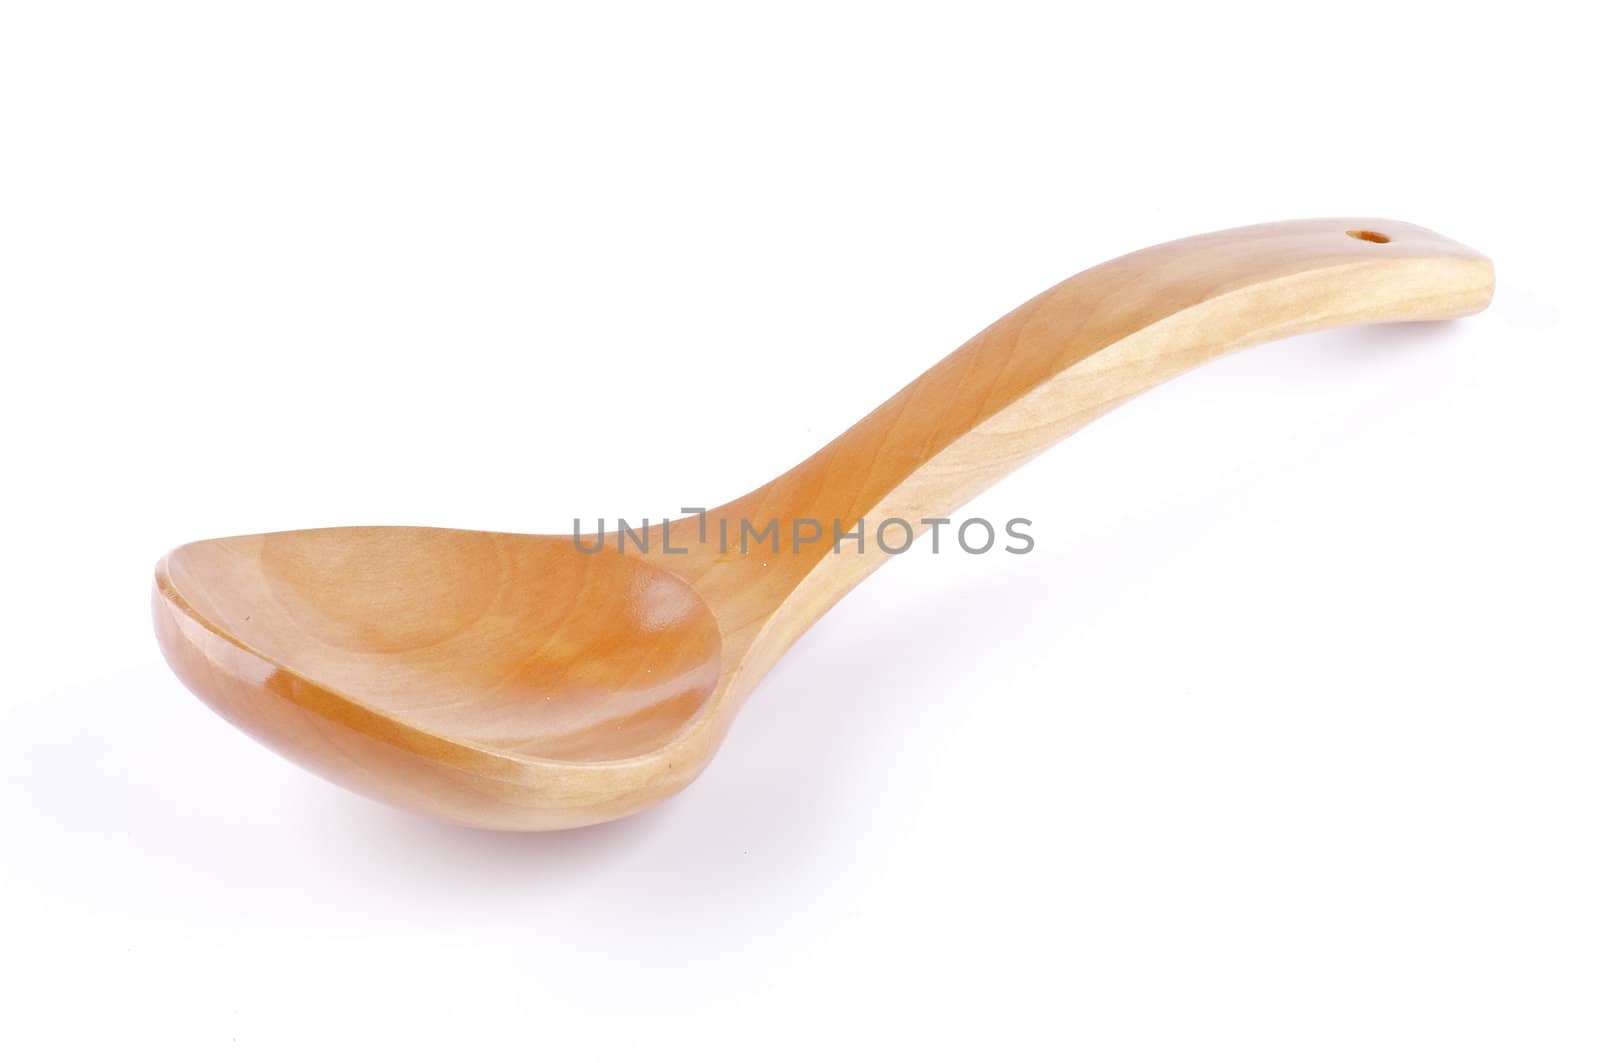 New wooden spoon isolated on white background